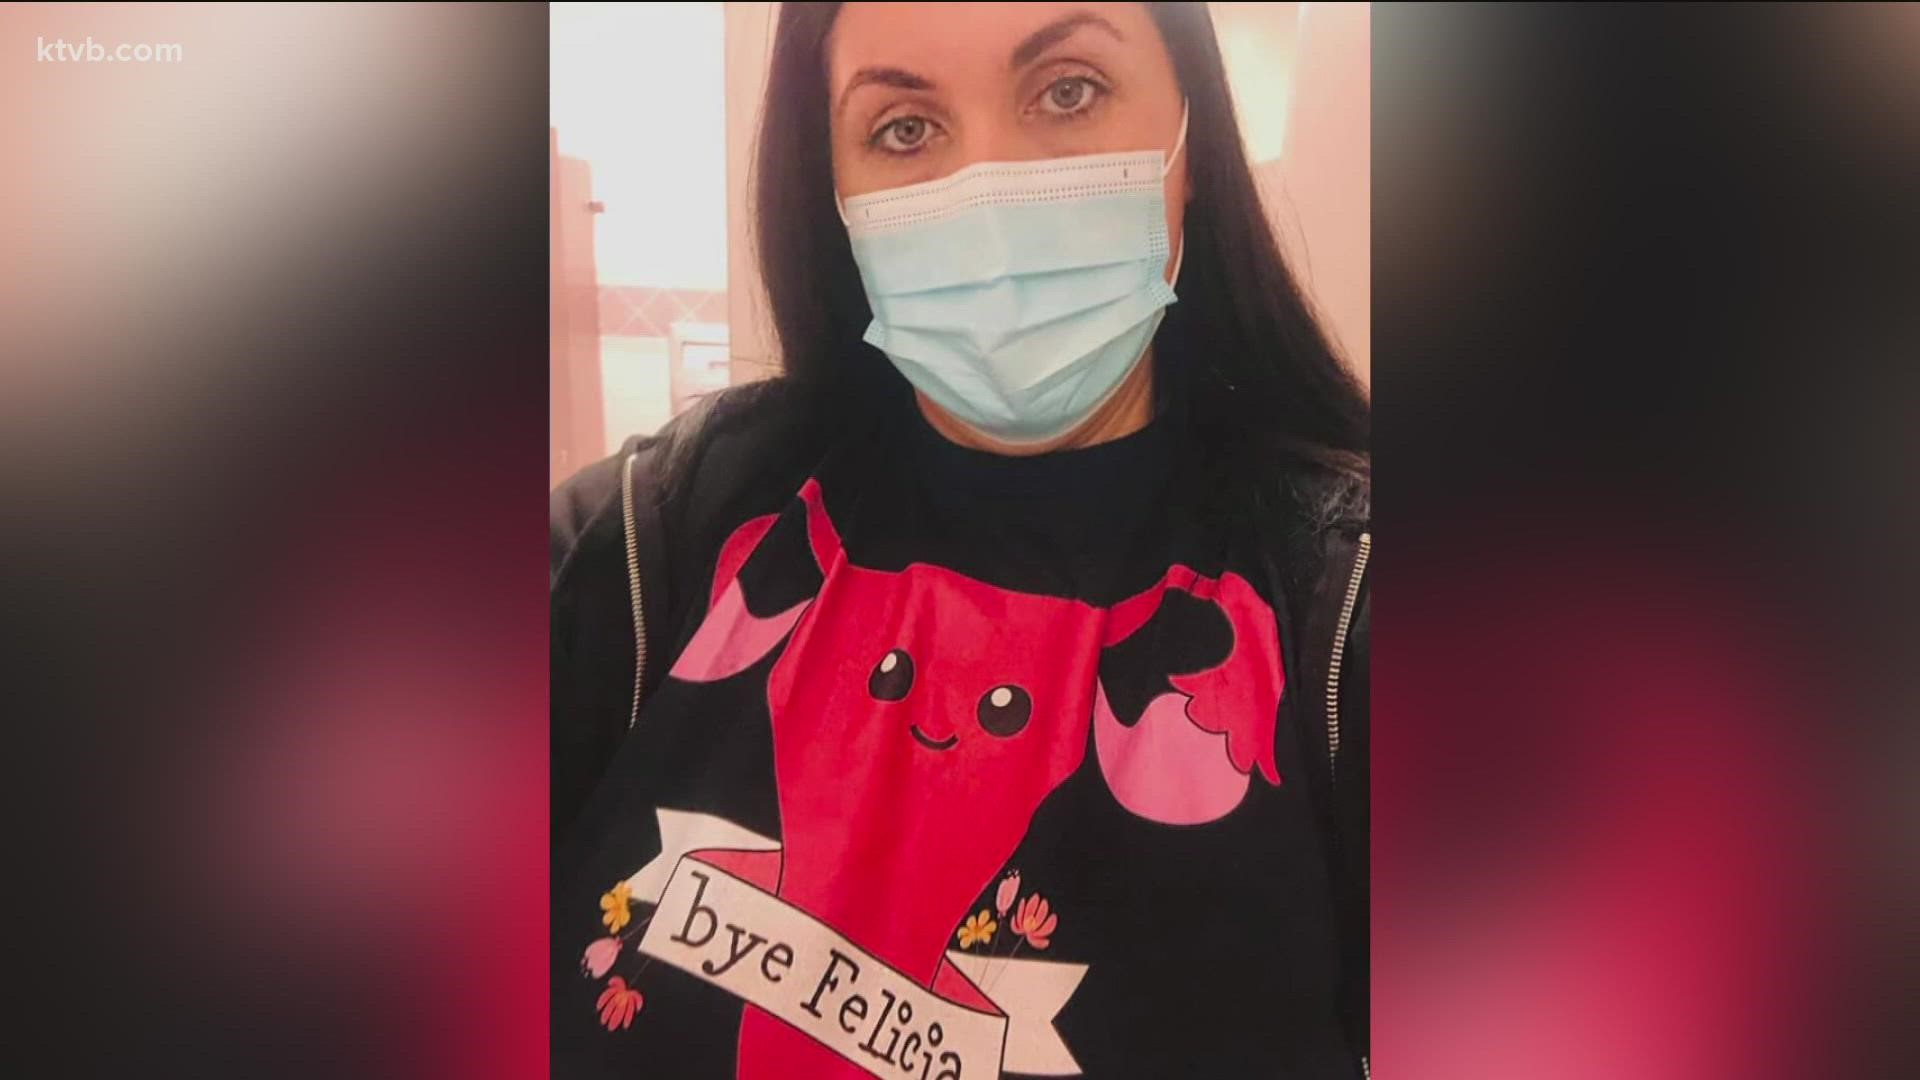 Elizabeth Obregon battled cancer, COVID-19 and had her first child during the pandemic. Her coworkers rallied around her to donate much-needed PTO.